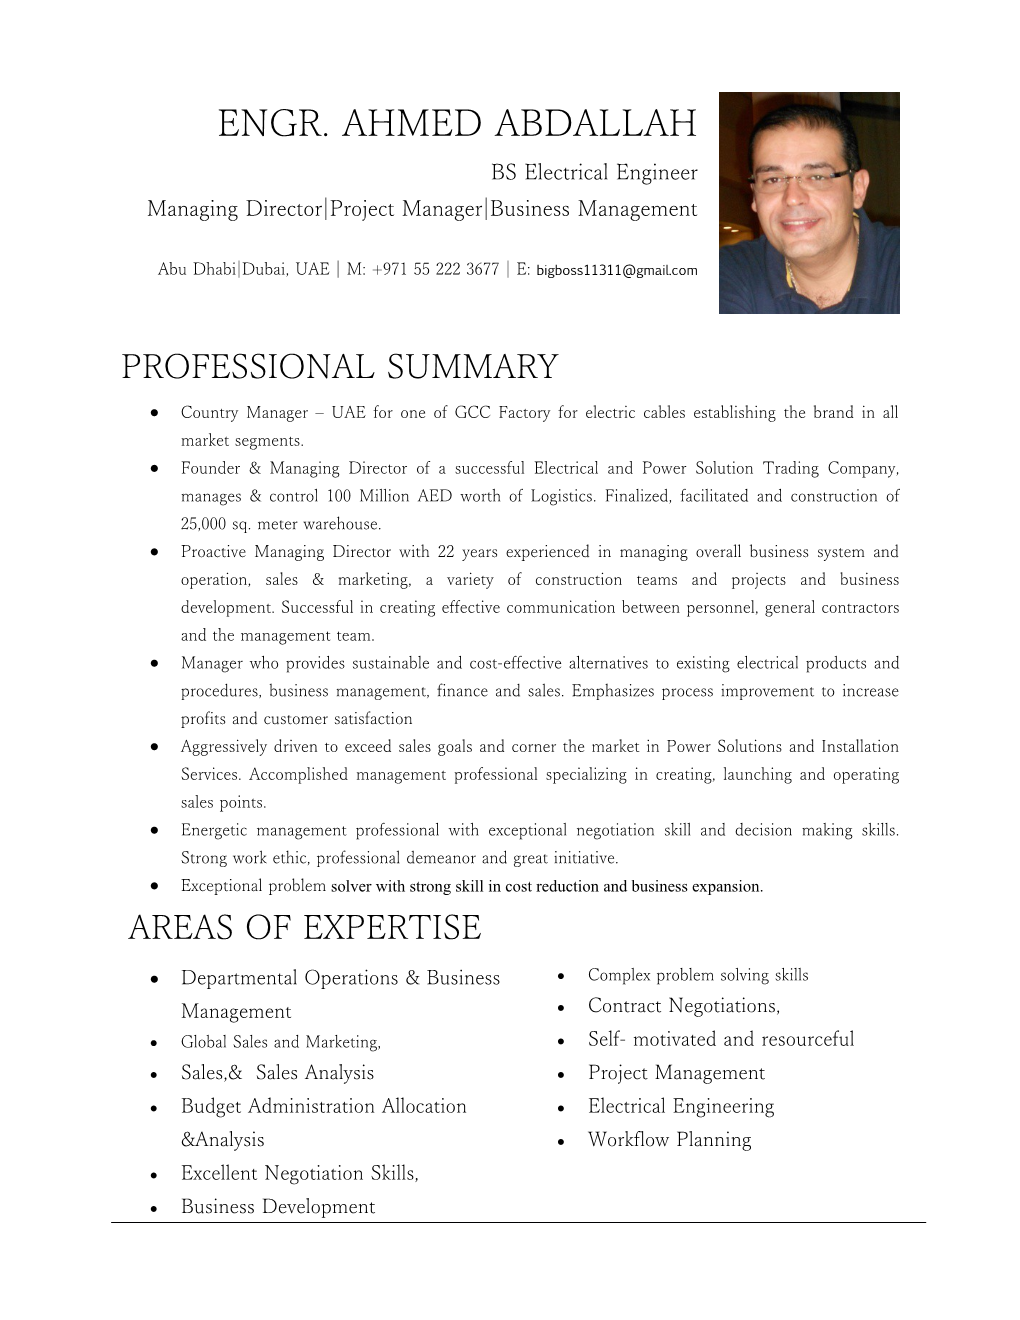 Founder & Managing Director of a Successful Electrical and Power Solution Trading Company